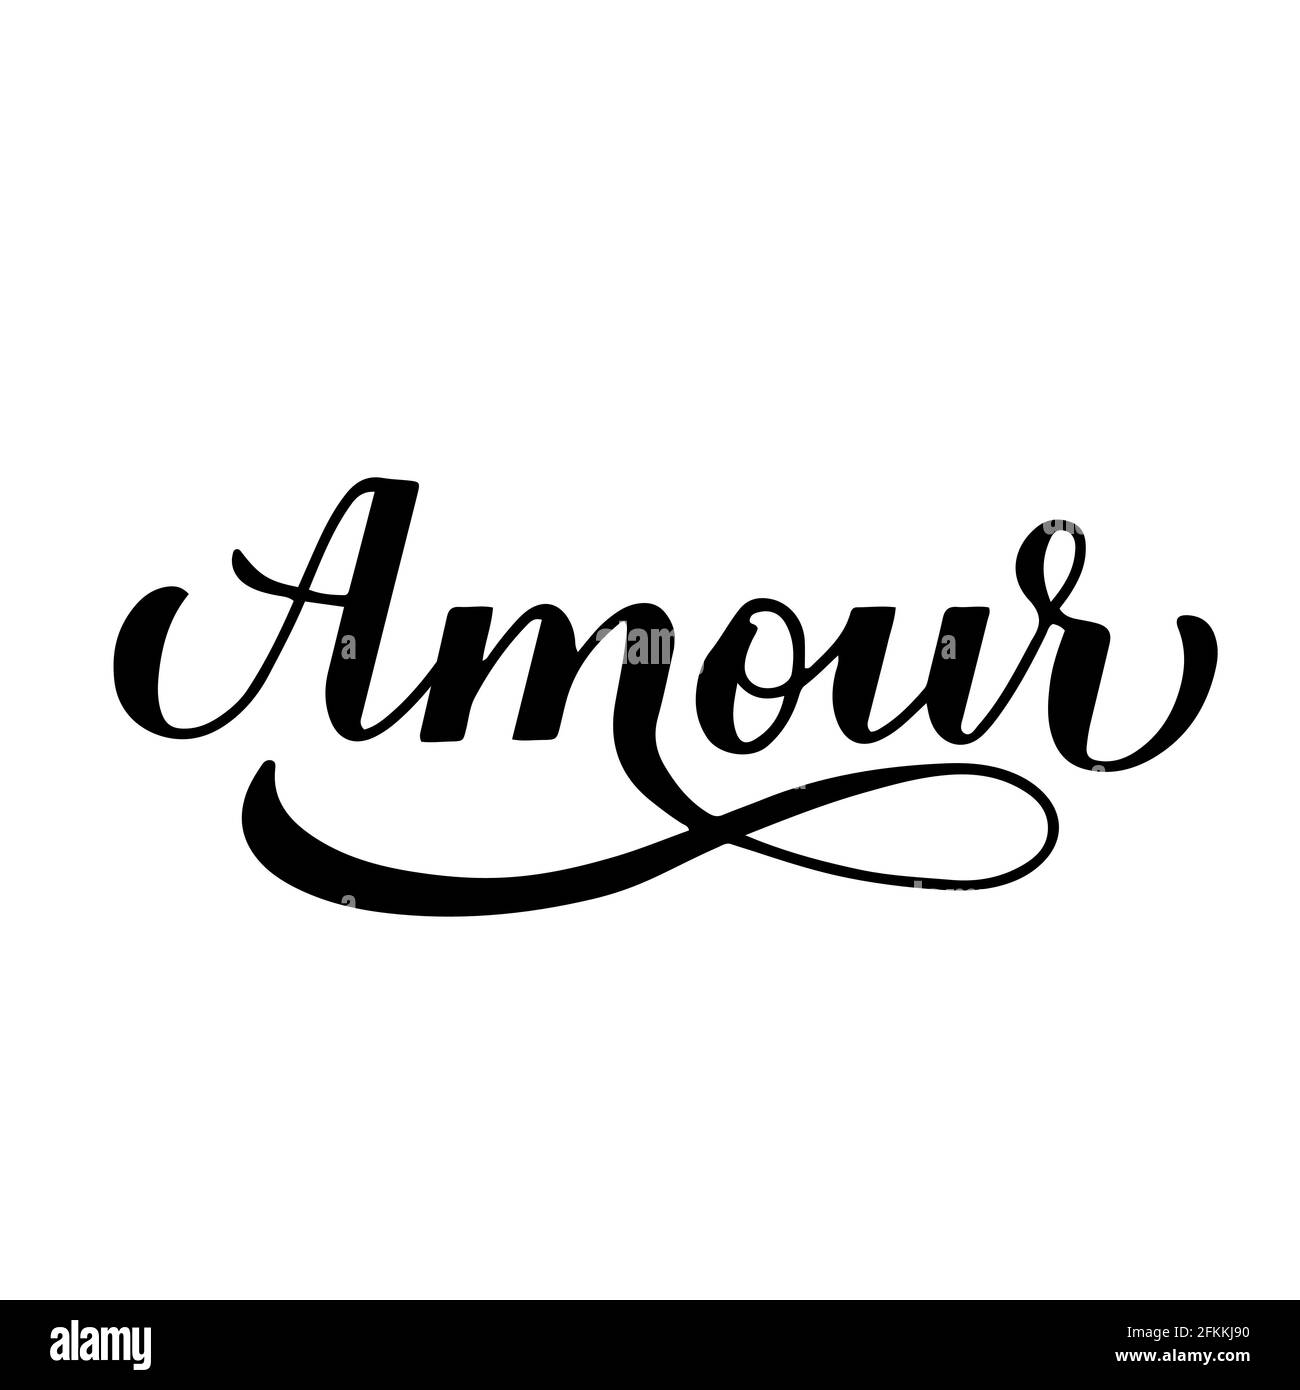 Mon amour valentines day card Royalty Free Vector Image